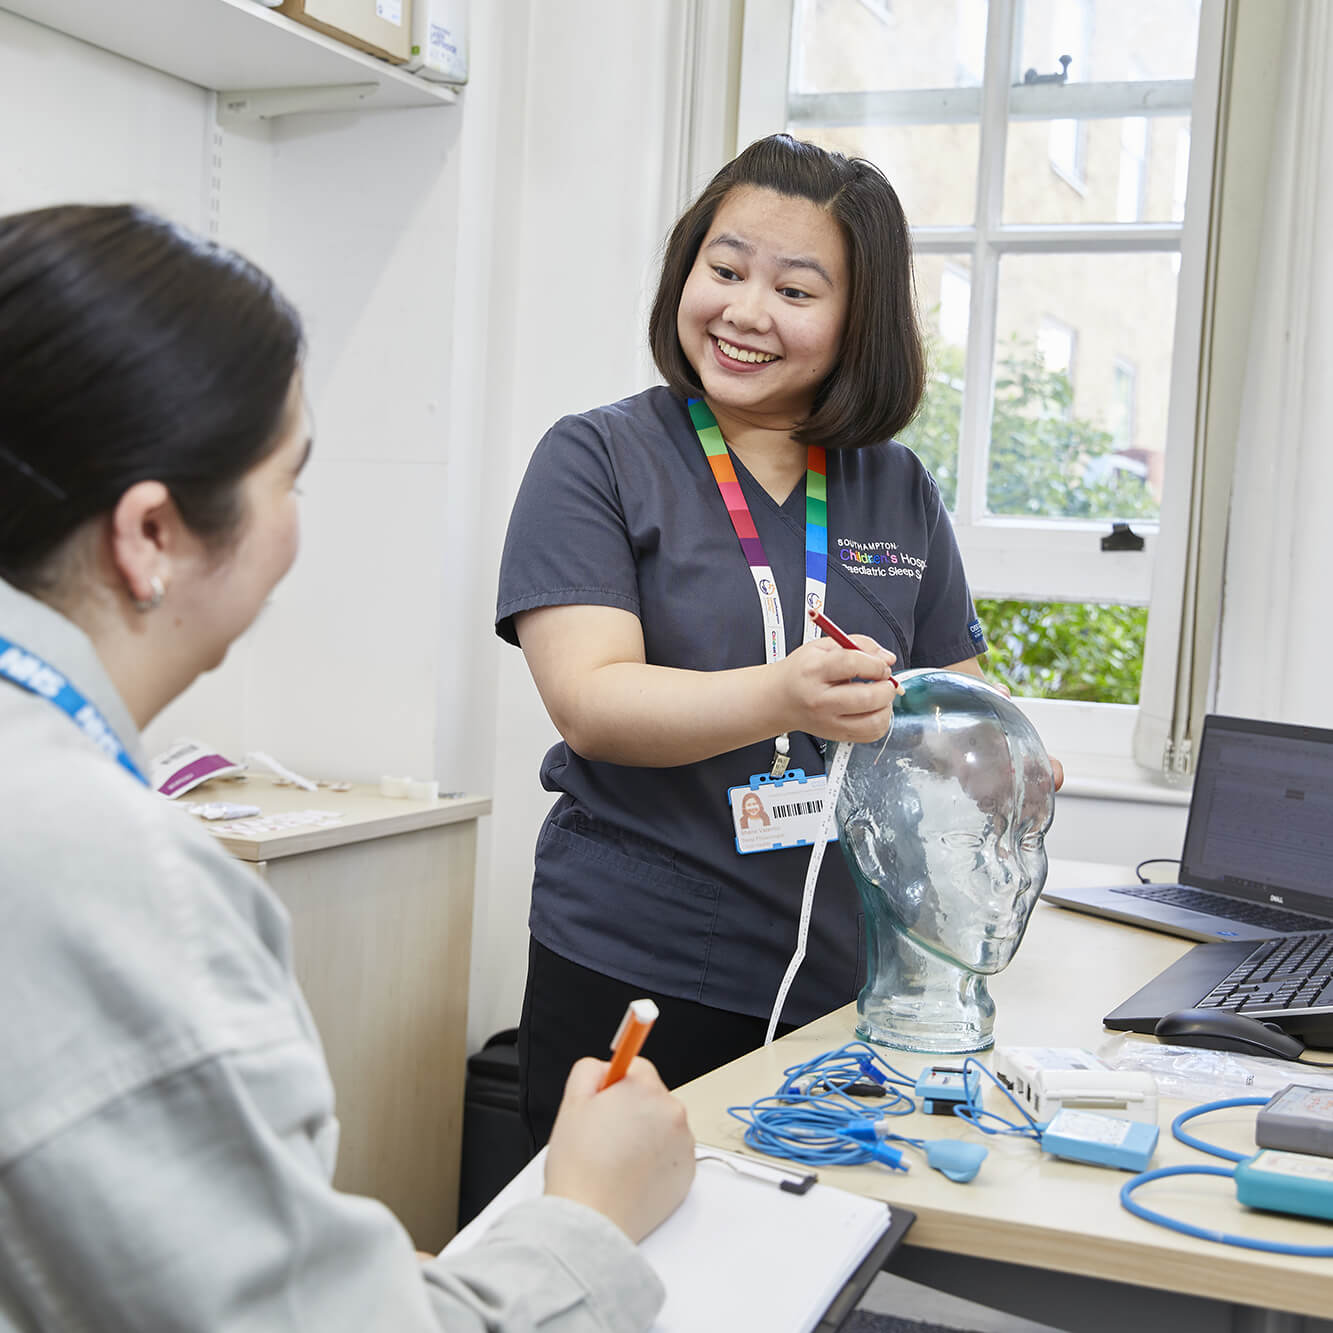 A smiling female healthcare instructor with a badge demonstrates medical equipment to a female student in a classroom, using a glass model of a head.